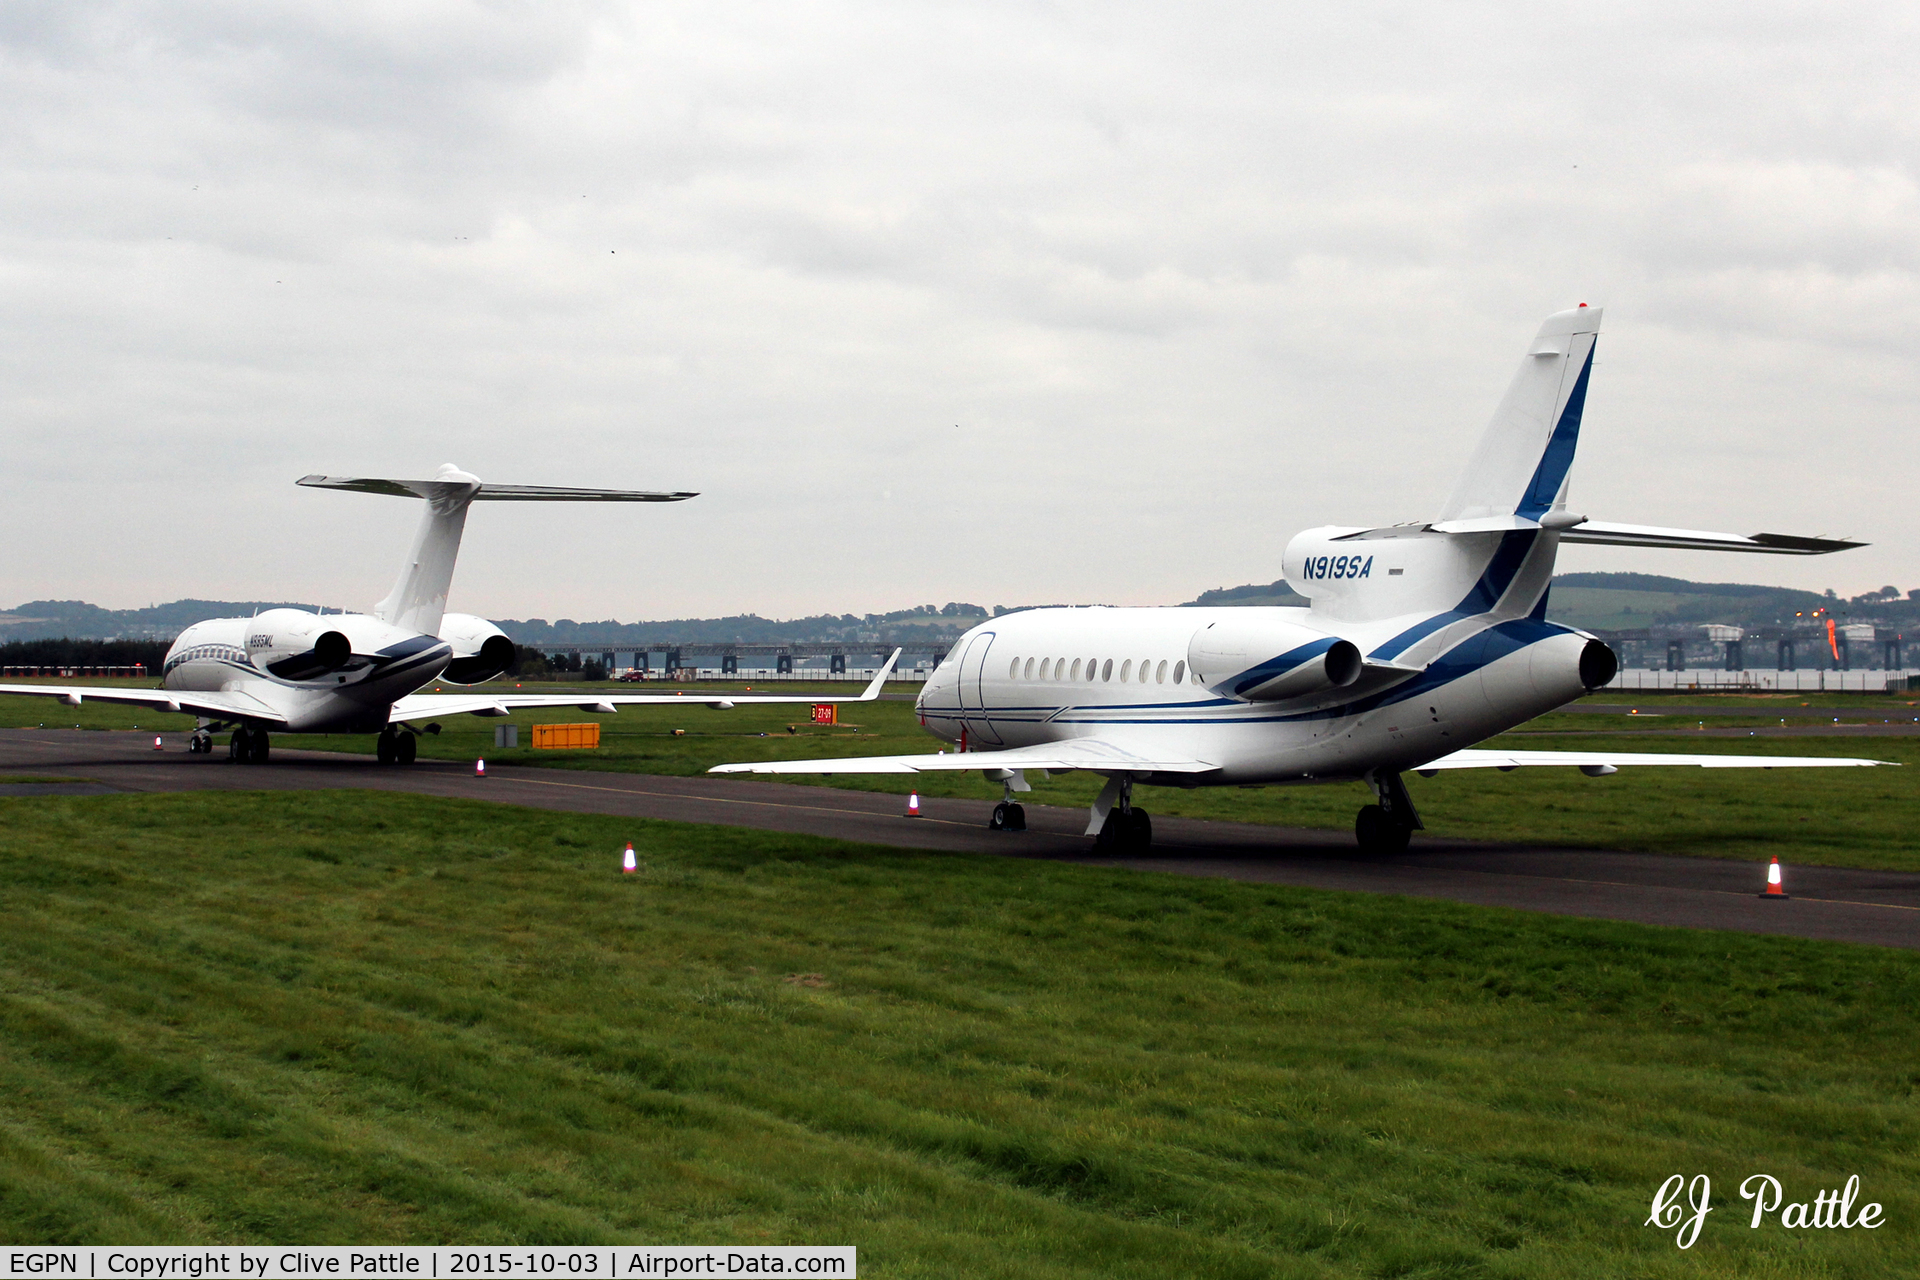 Dundee Airport, Dundee, Scotland United Kingdom (EGPN) - A bizjet busy weekend at Dundee Riverside EGPN during the Dunhill Golf Championships at nearby St Andrews.